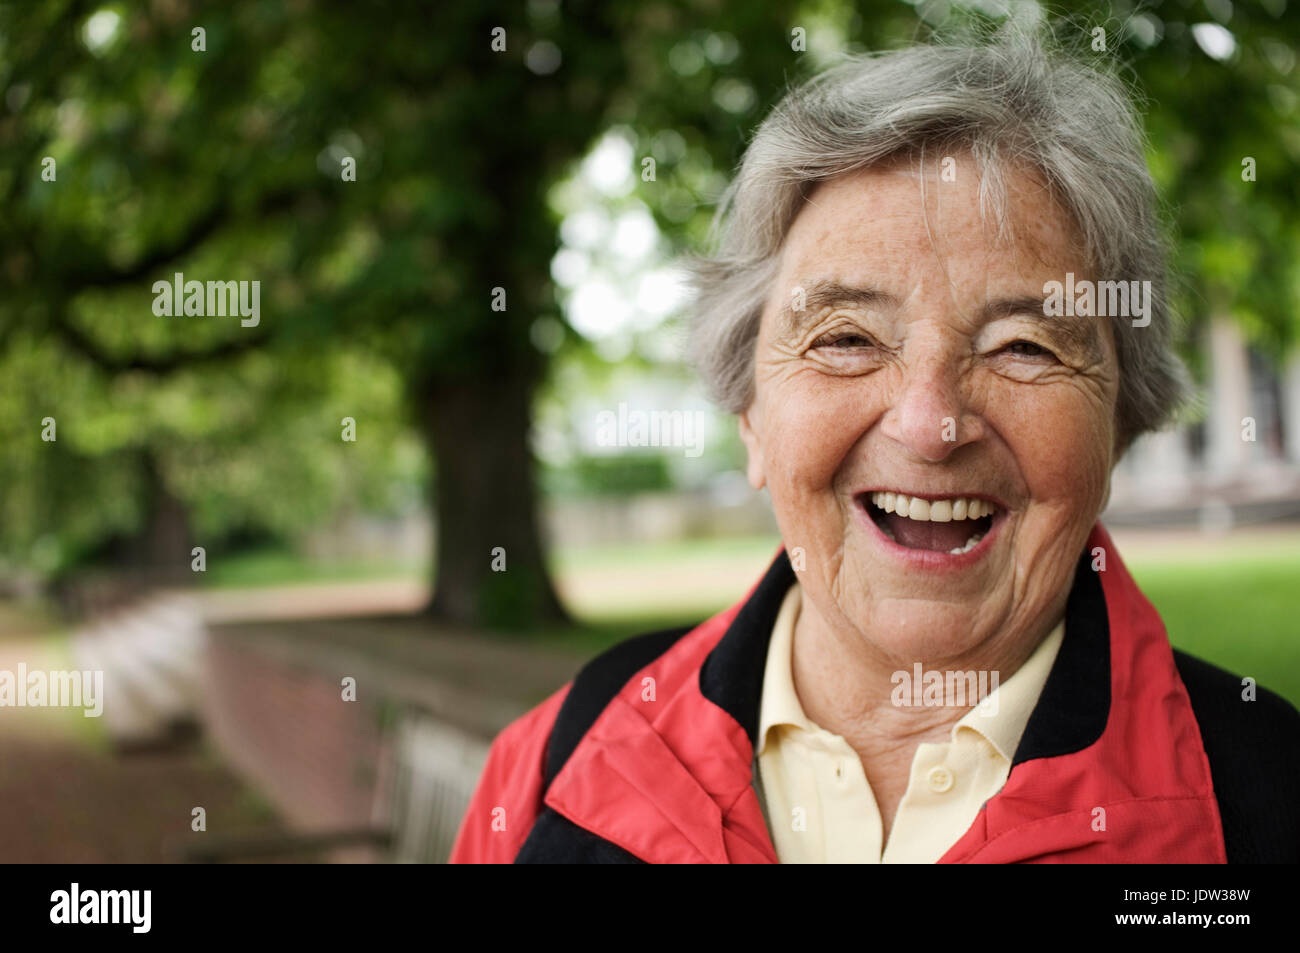 Older woman laughing in park Stock Photo